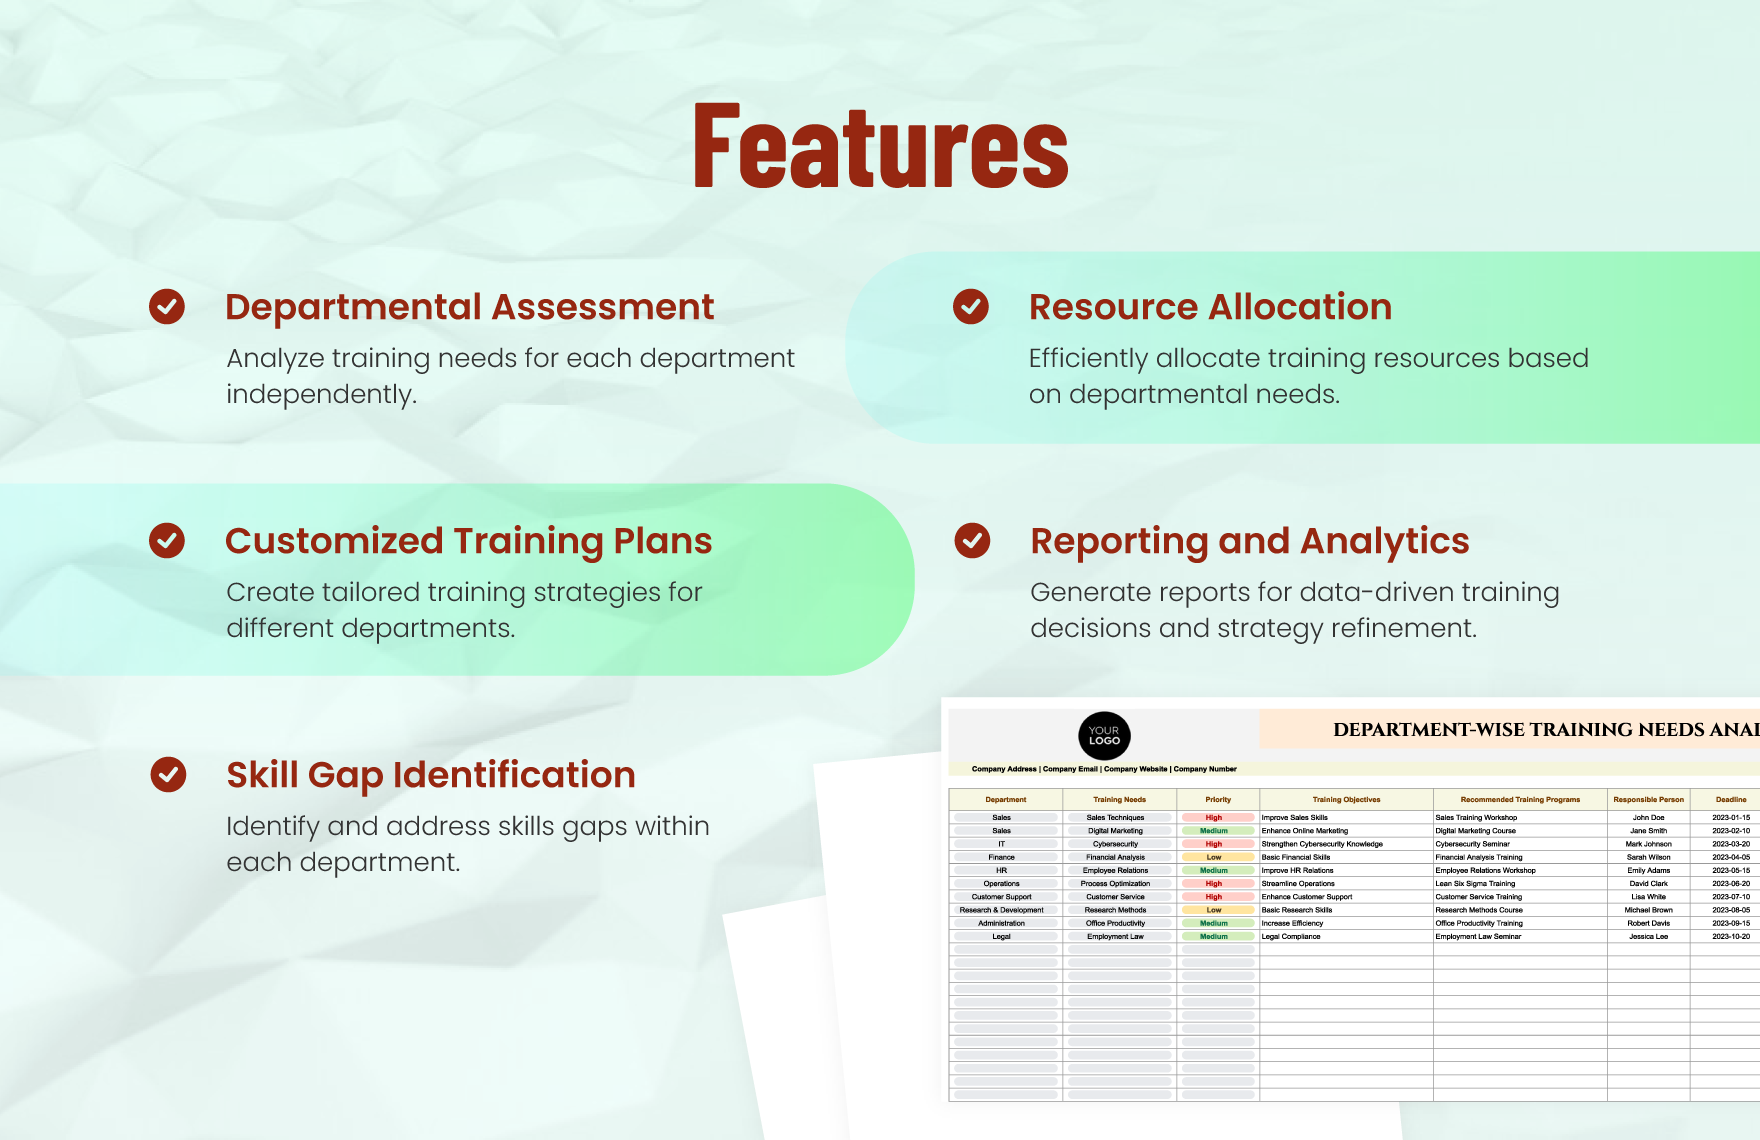 Department-wise Training Needs Analysis HR Template